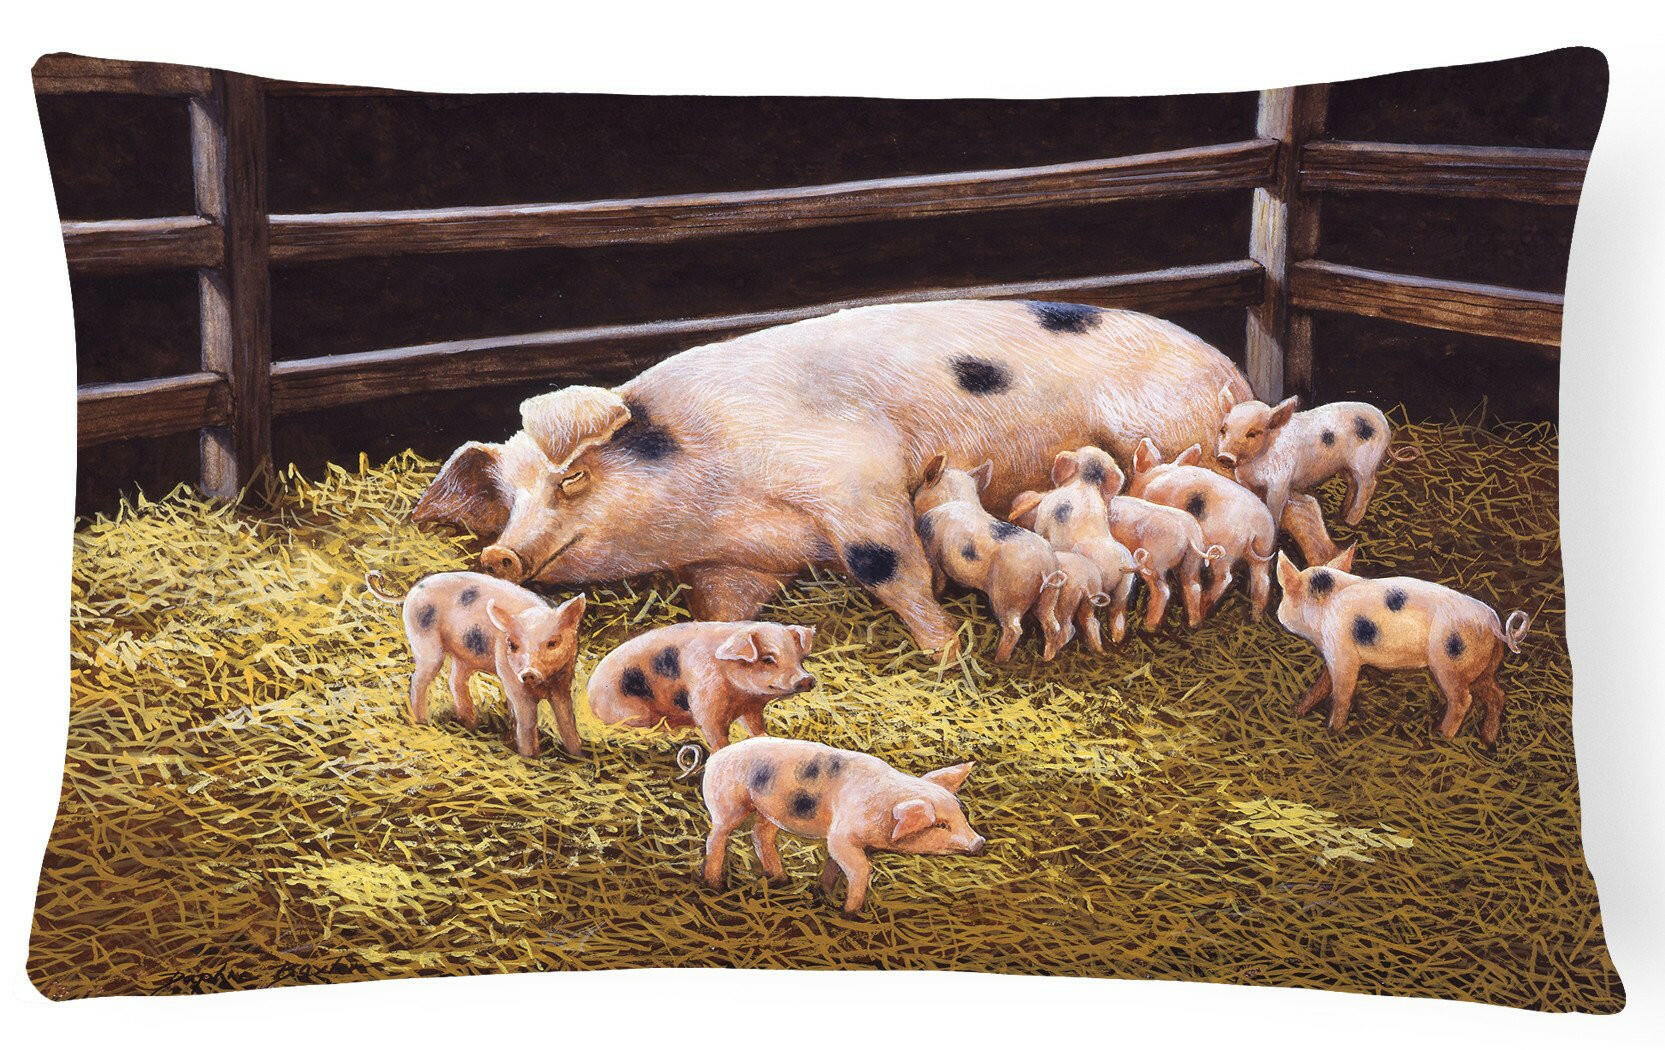 Pigs Piglets at Dinner Time Fabric Decorative Pillow BDBA0296PW1216 by Caroline's Treasures